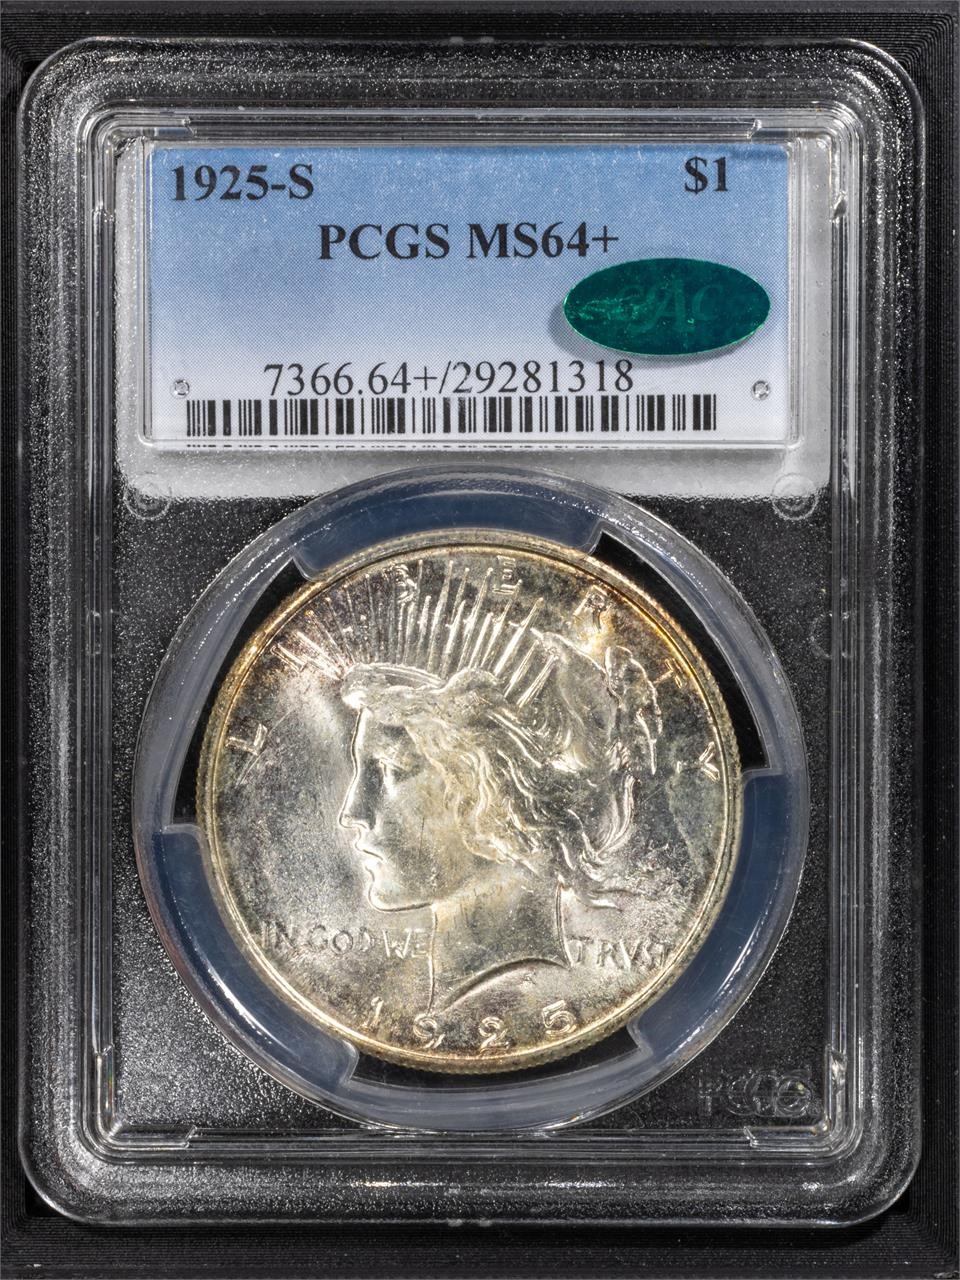 Historic Coppers to Silver Dollars Auction